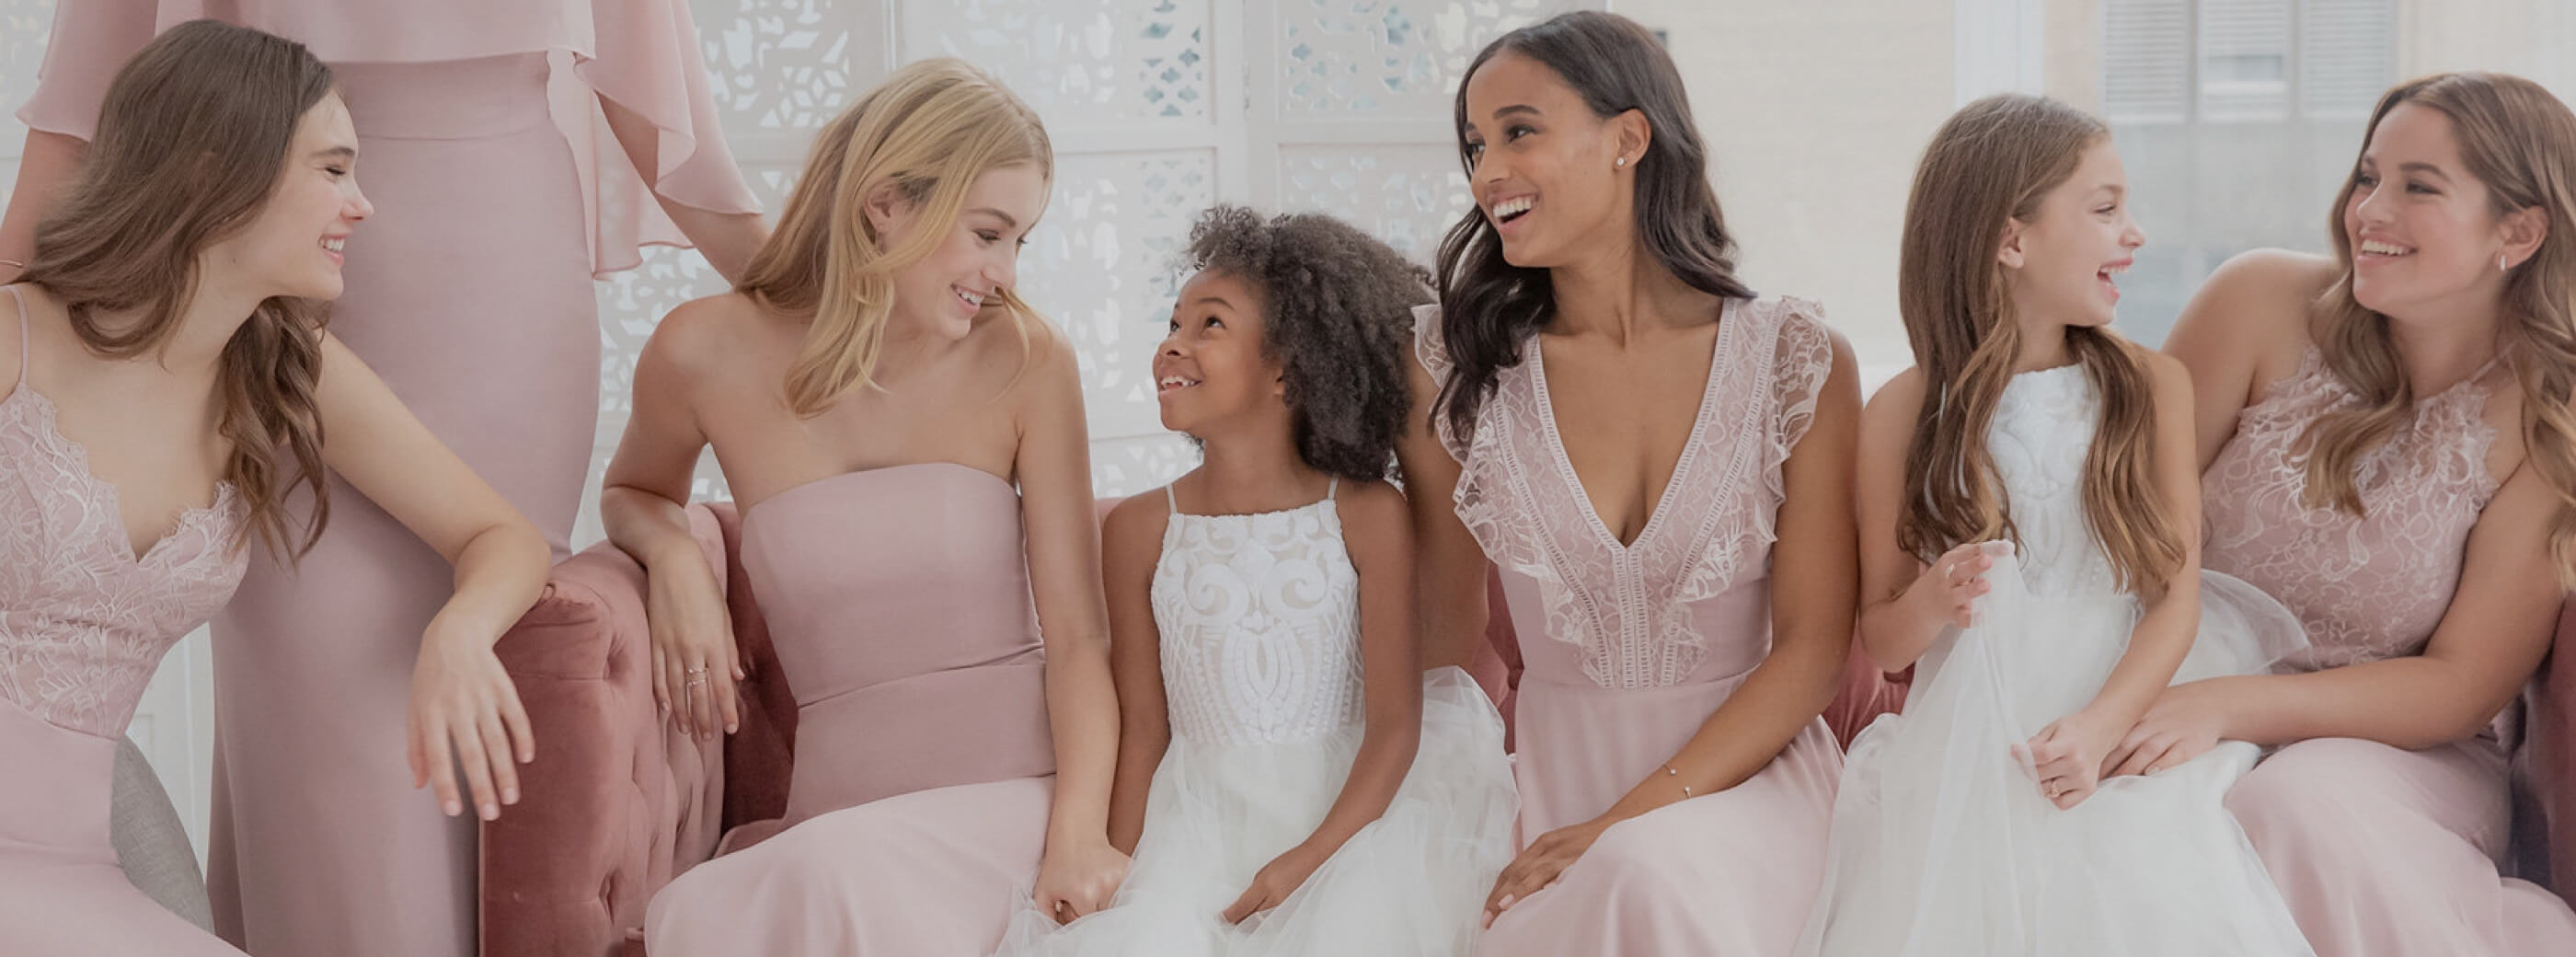 Bridesmaids in pale pink dresses